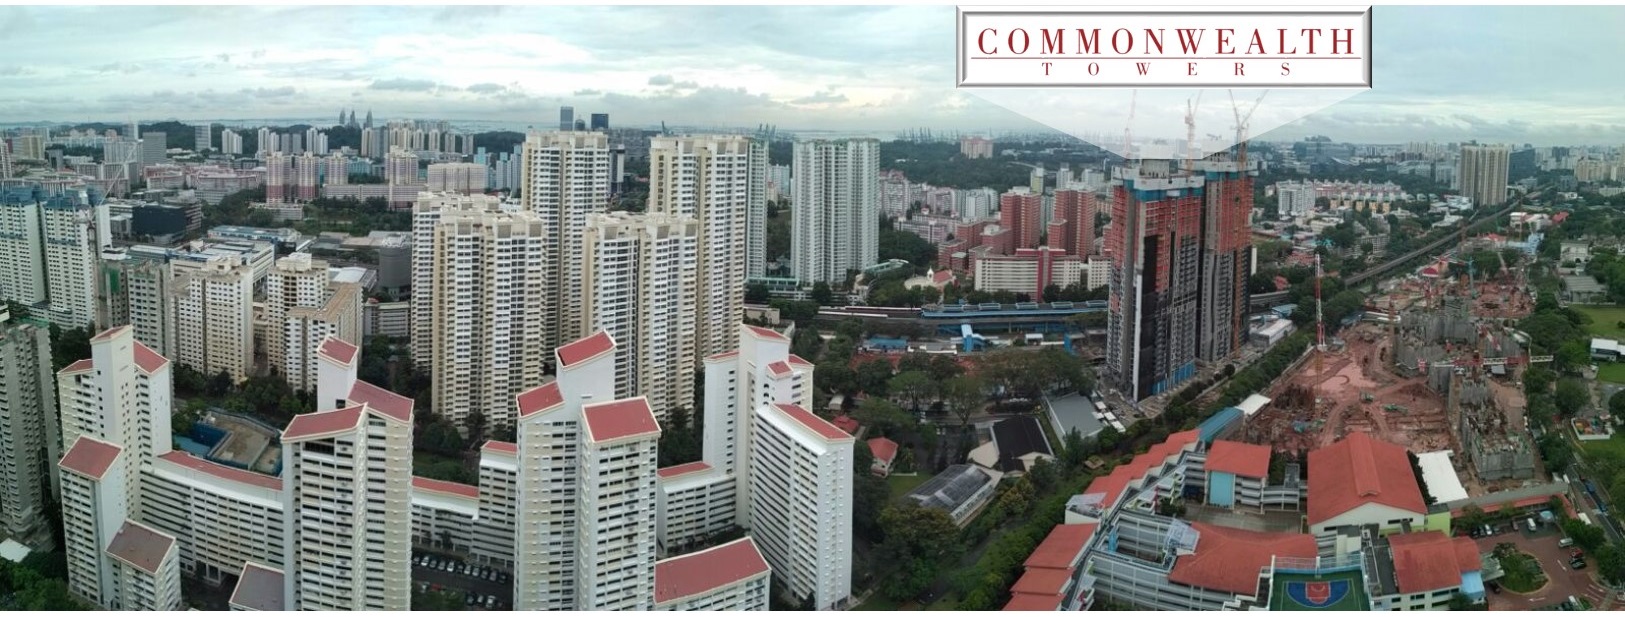 commonwealth tower site view